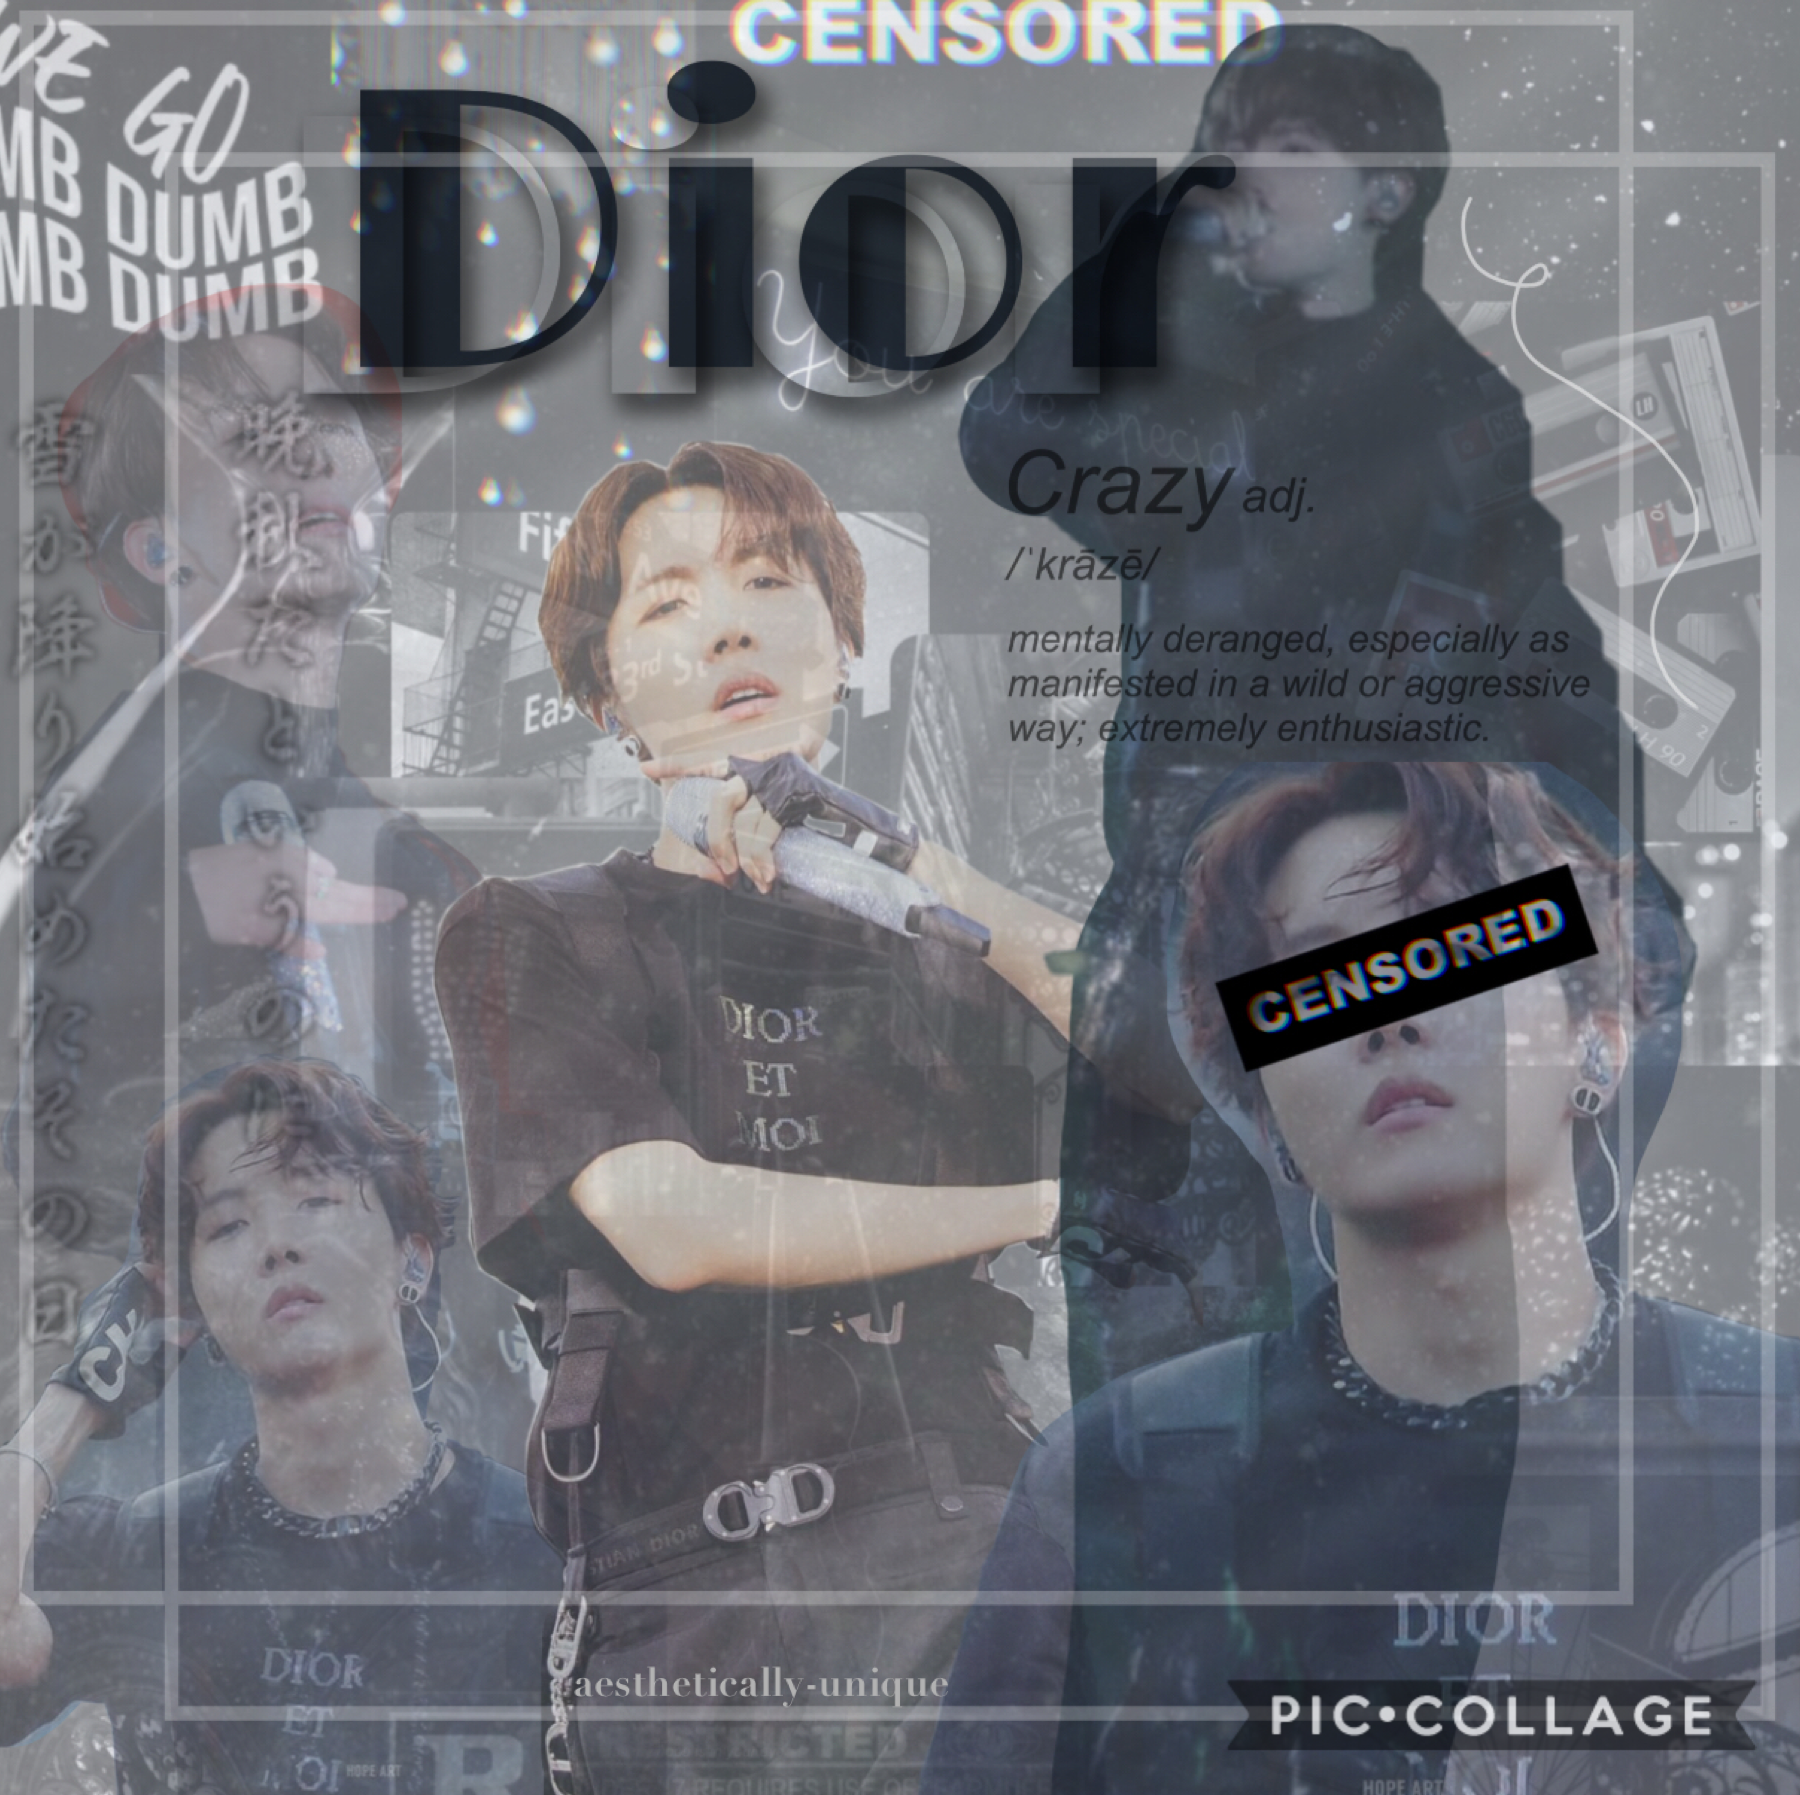 -🔥-
sorry for the late post. 

PicsArt didnt wanna listen to me.

anyways, i was thinking maybe i should change my name since my collages from now on are gonna be KPOP related..

should i?

if you think i should, leave some suggestions in the comments bel